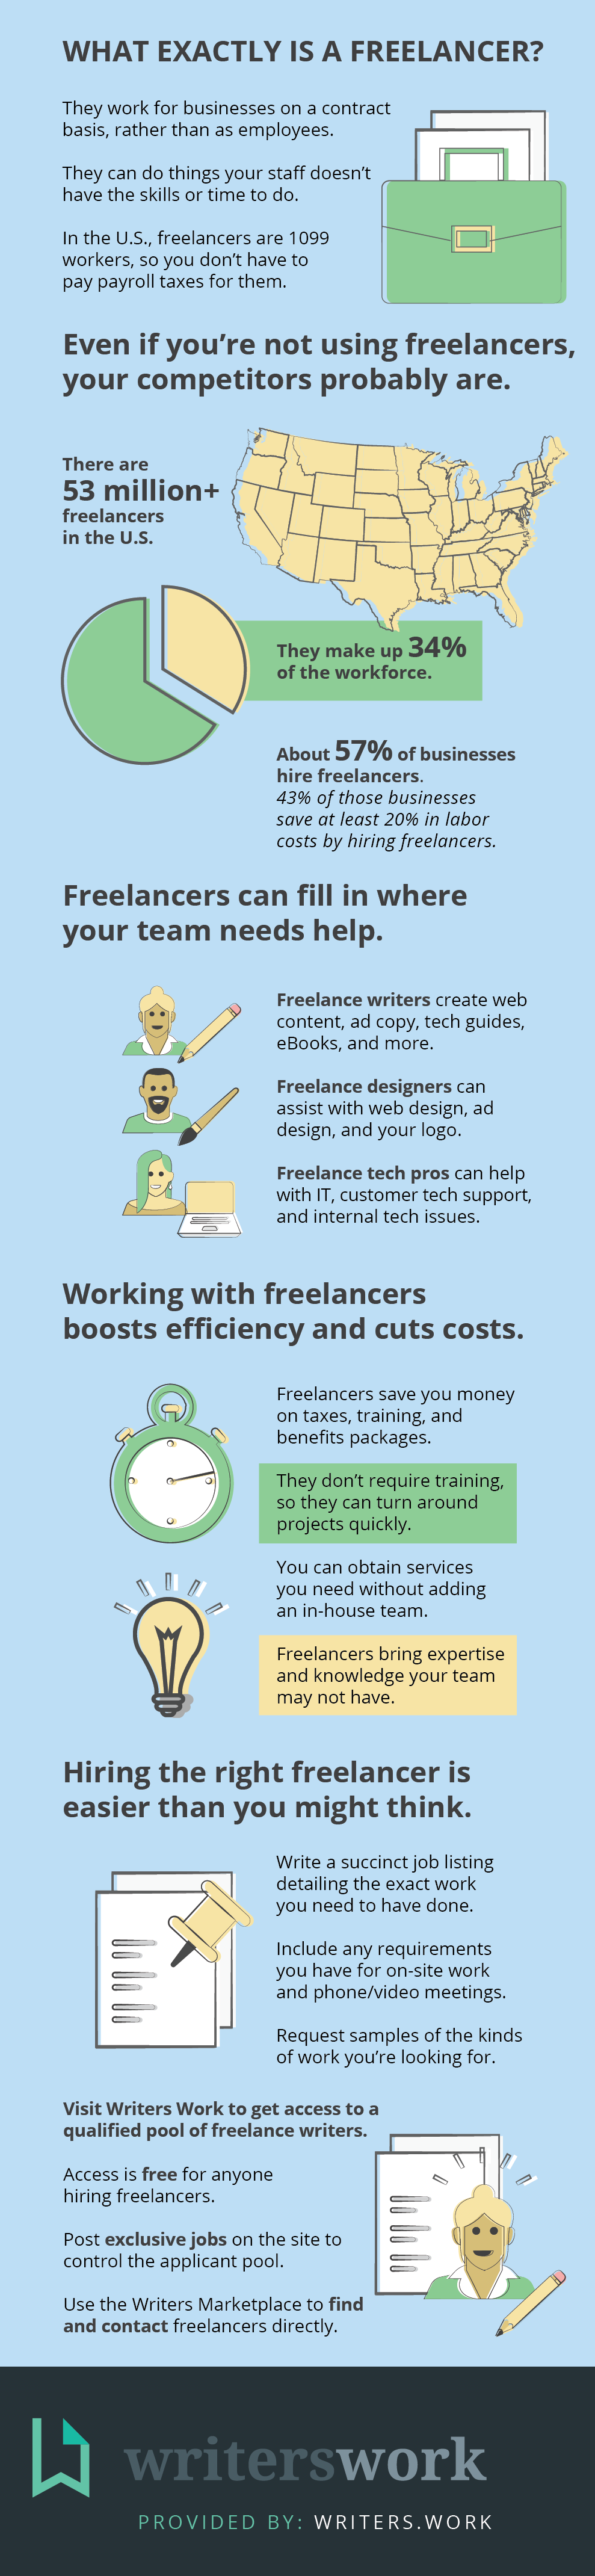 How Hiring a Freelancer Can Help Your Business | Writers Work